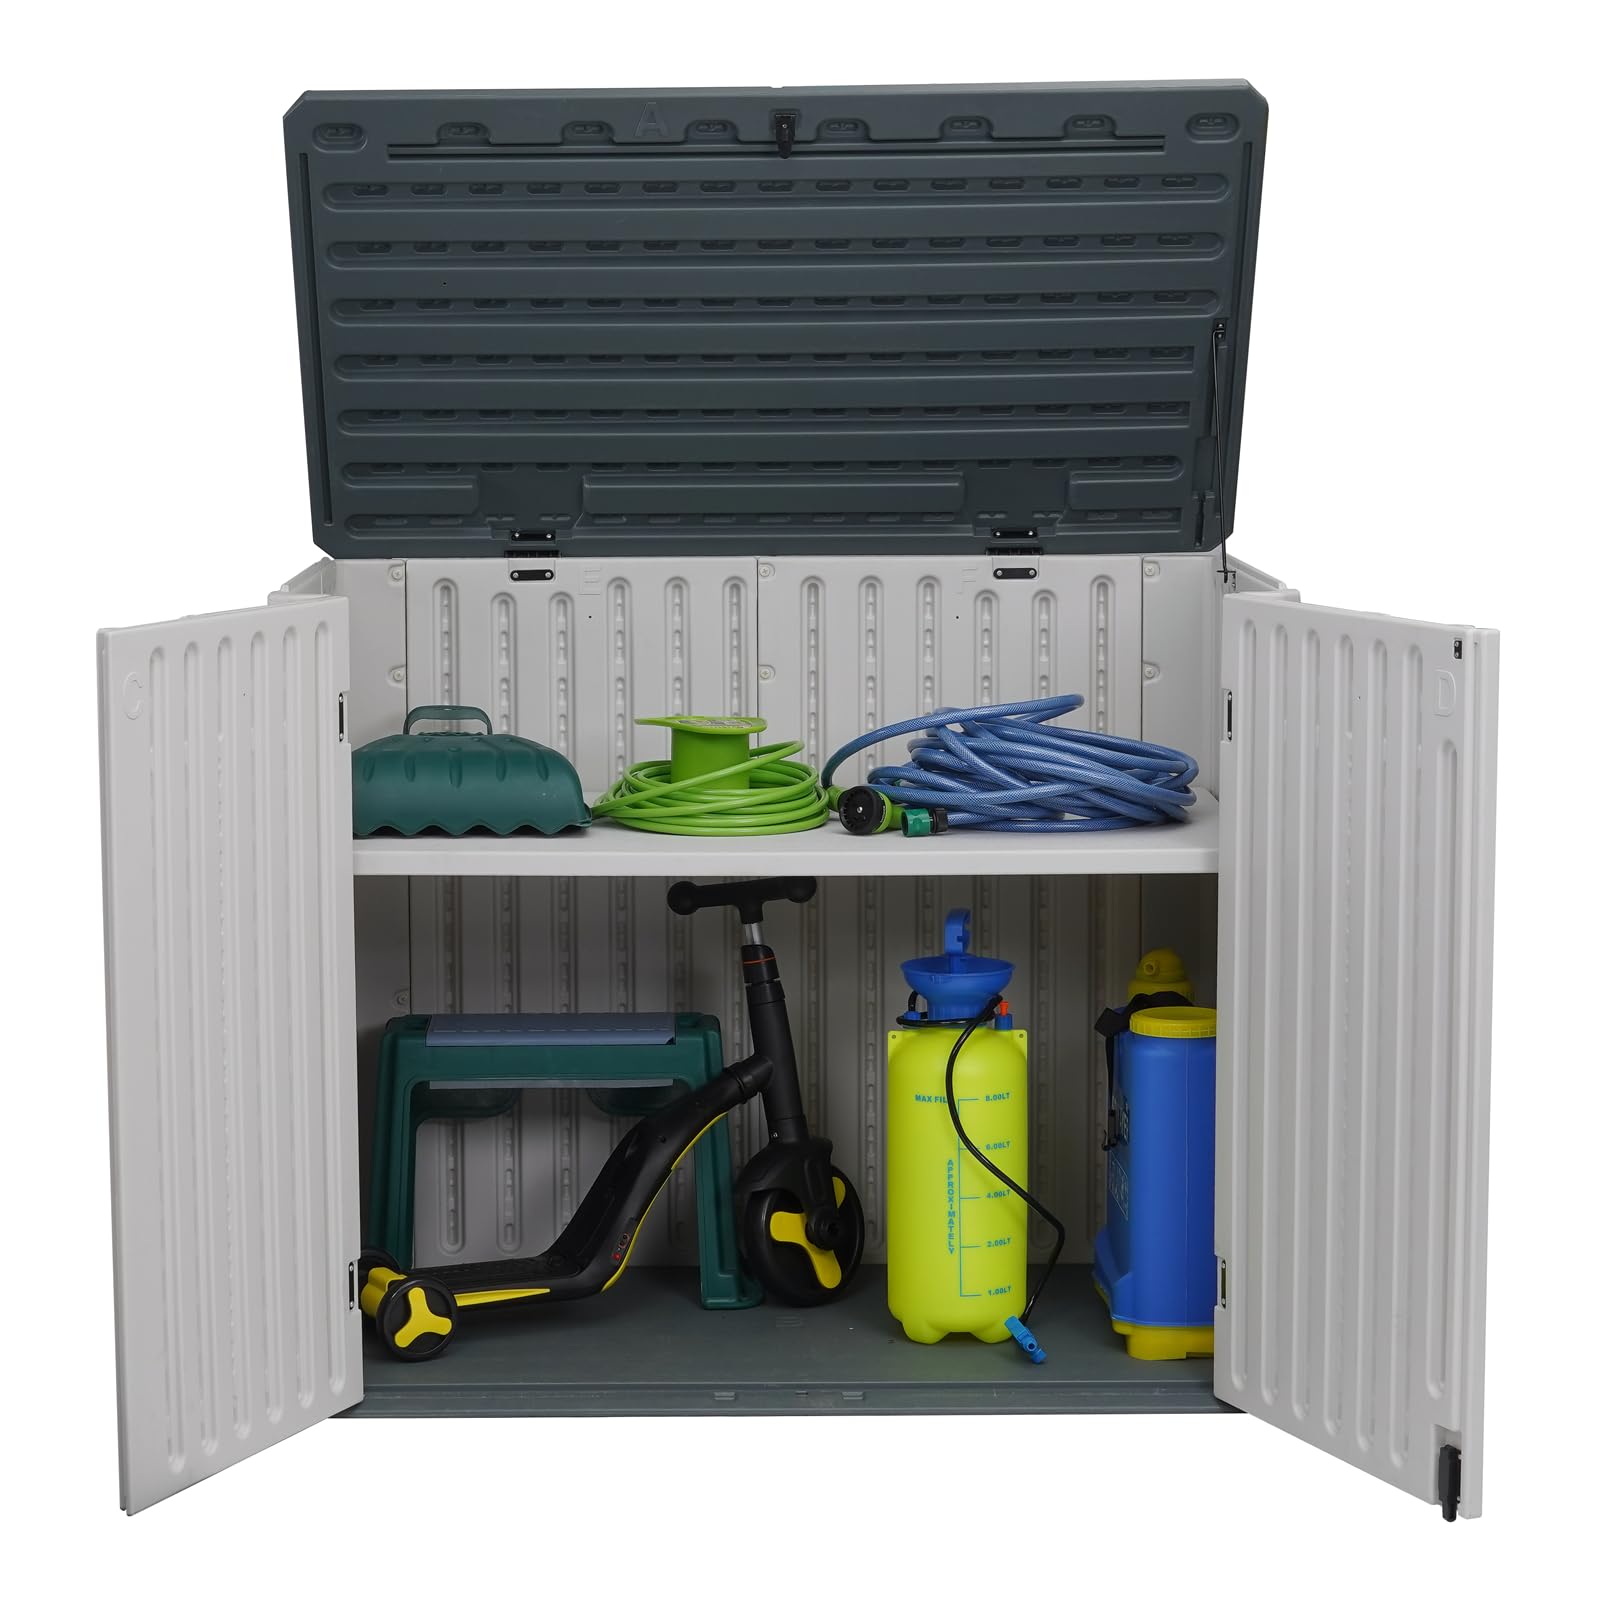 EHHLY 35 Cuft Outdoor Storage Shed with Floor, 4Ft Outside Storage Cabinet, 2 Shelf